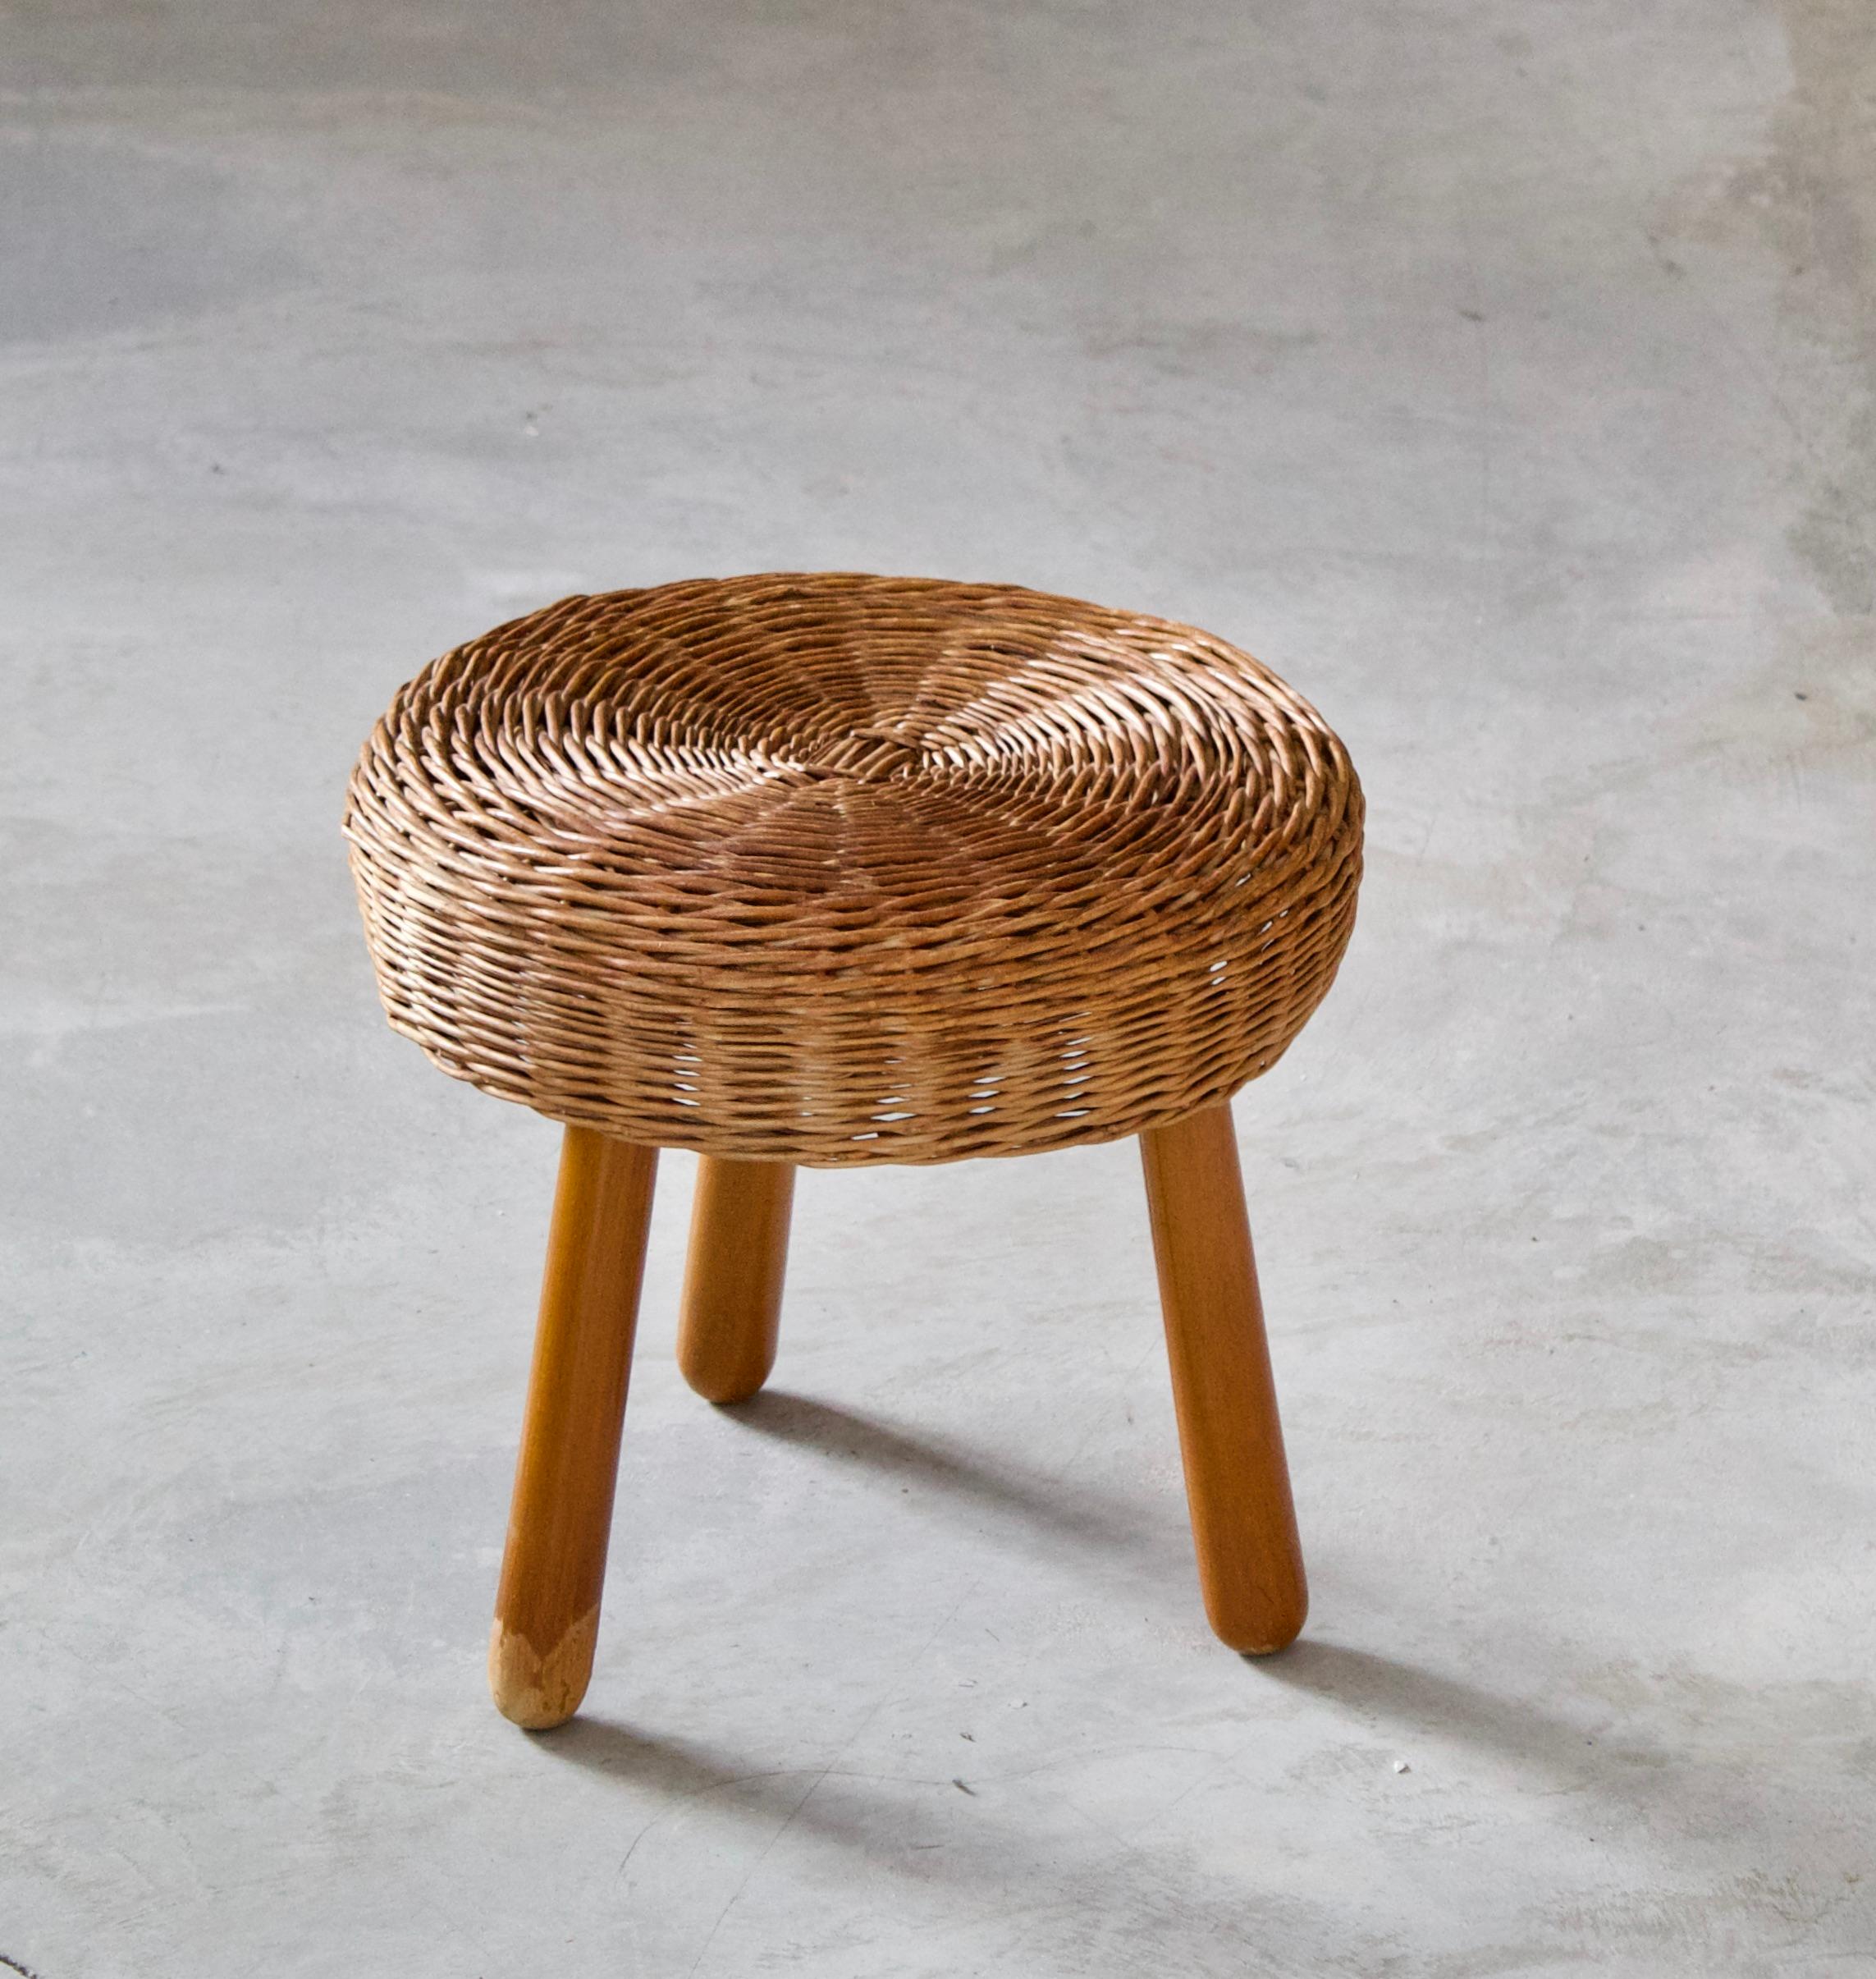 A stool, design attributed to Tony Paul. Features an interesting mix of rattan and finely carved solid wood.

Other designers of Minimalist stools of the period include Charlotte Perriand, Pierre Chapo, Isamu Noguchi, Eero Arnio, and Sori Yanagi.